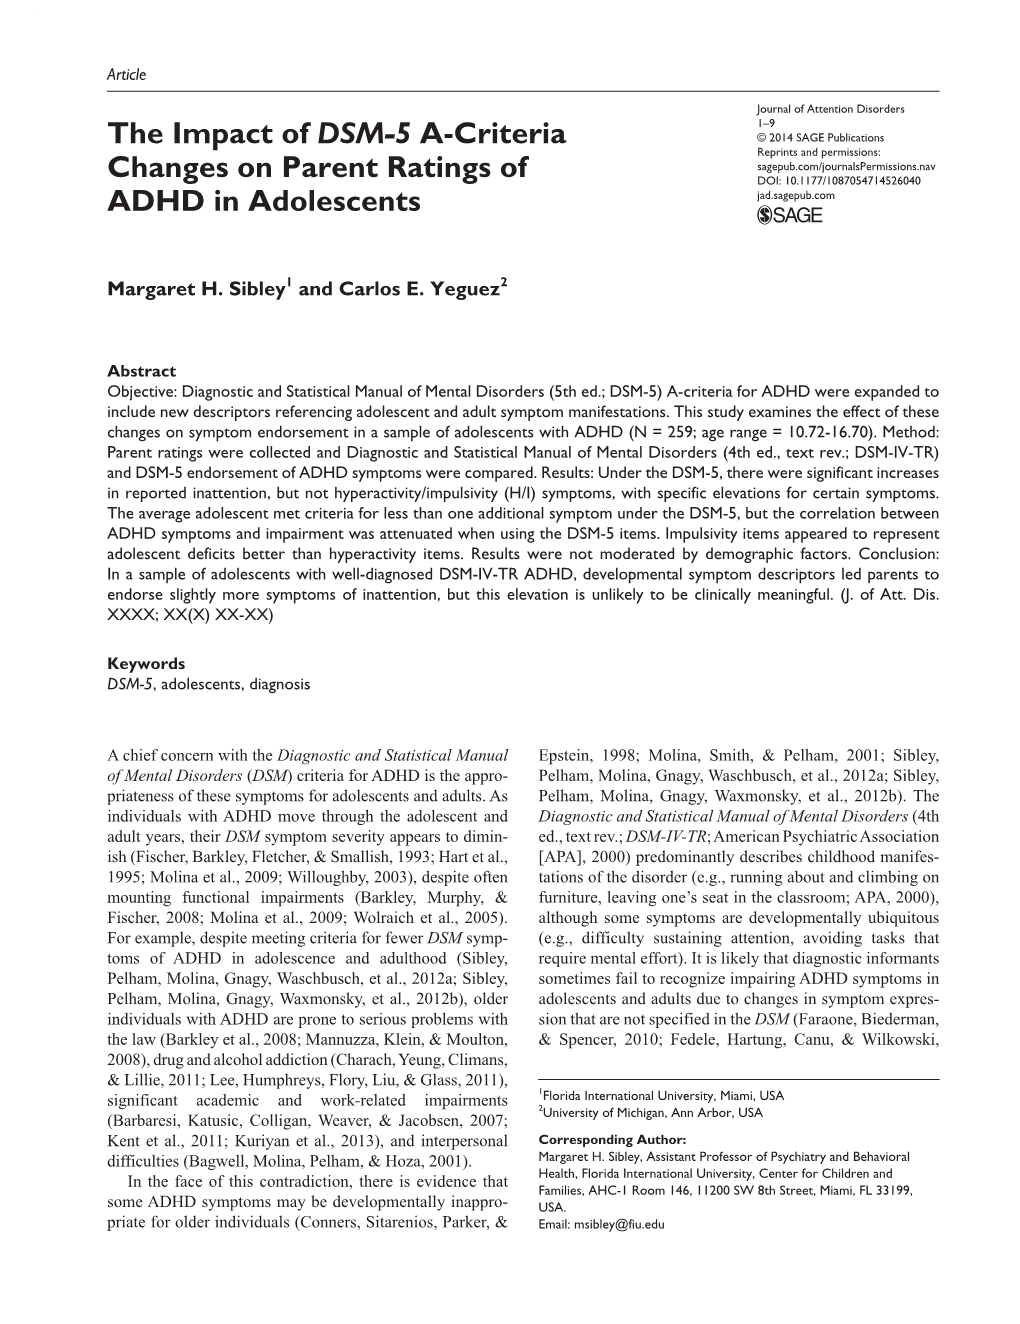 The Impact of DSM-5 A-Criteria Changes on Parent Ratings of ADHD in Adolescents